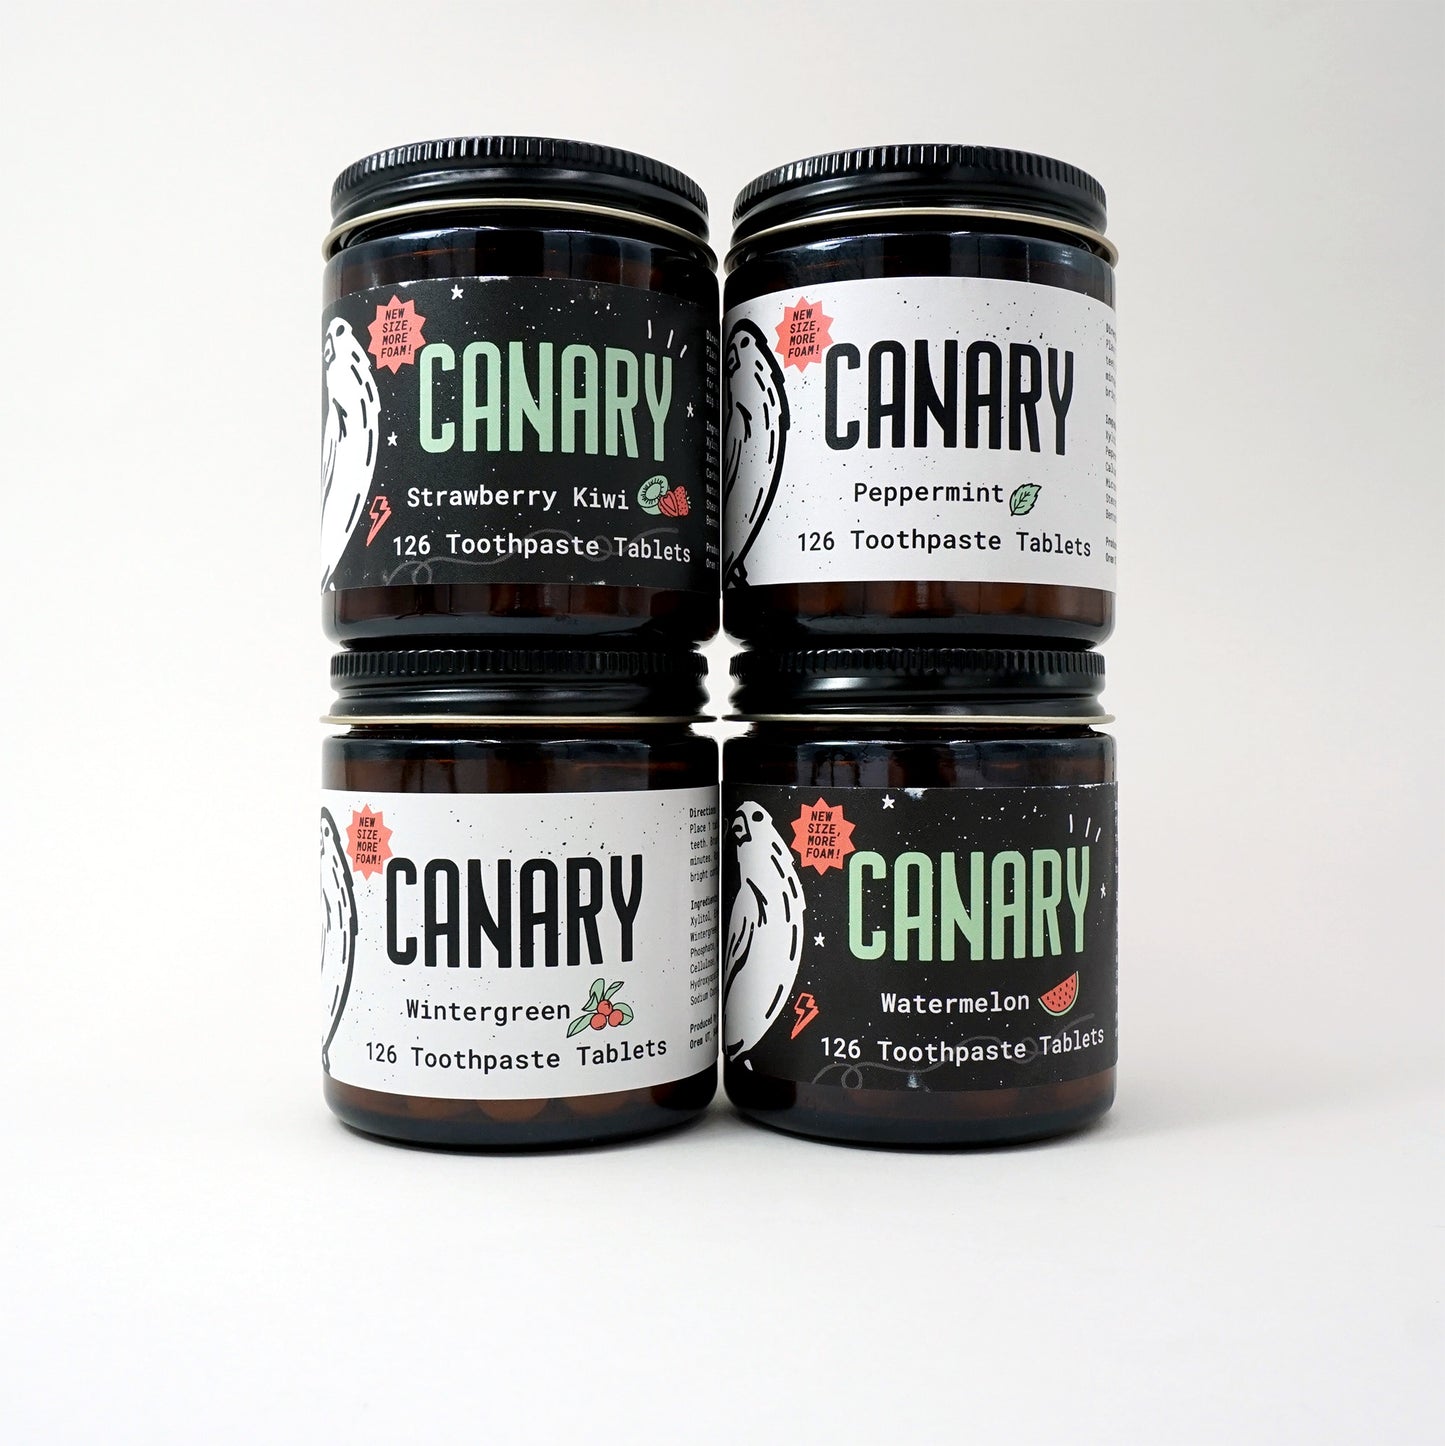 4 pack bundle of all four flavors in the new and improved formula, 126 count jars. Peppermint, Wintergreen, Watermelon and Strawberry Kiwi toothpaste tablets